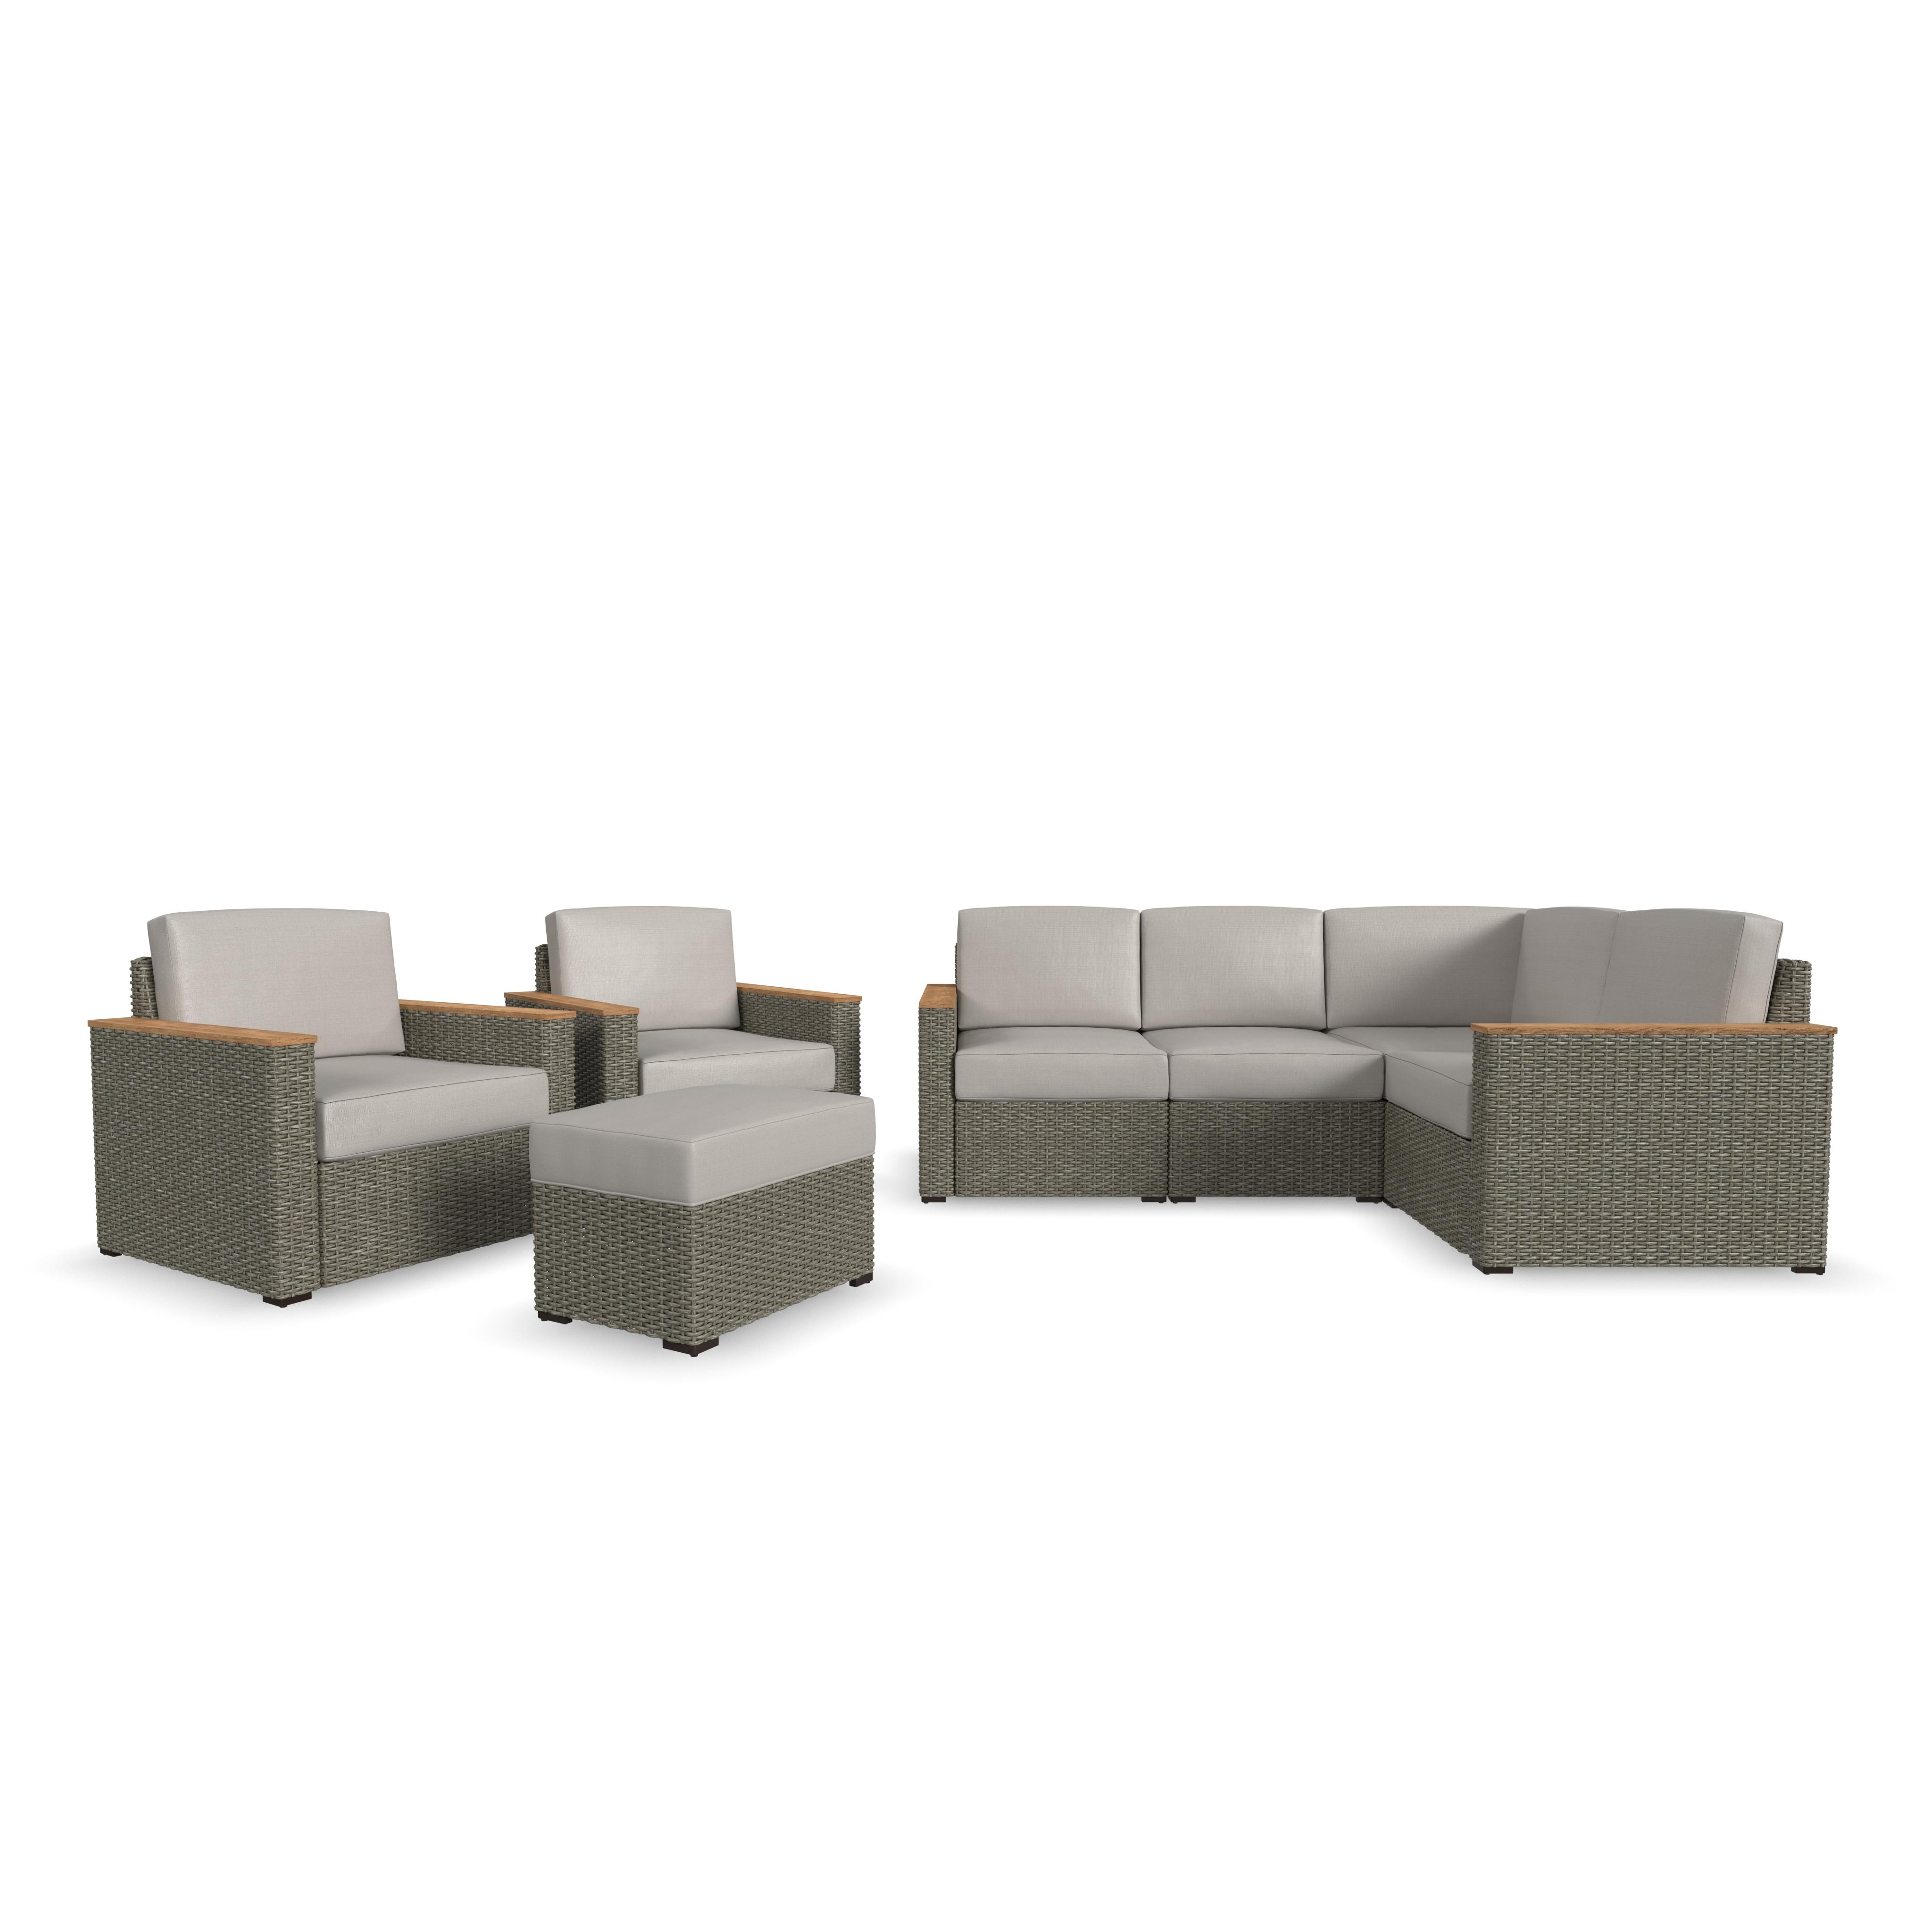 Homestyles Boca Raton Outdoor 4 Seat Sectional, Arm Chair Pair and Ottoman